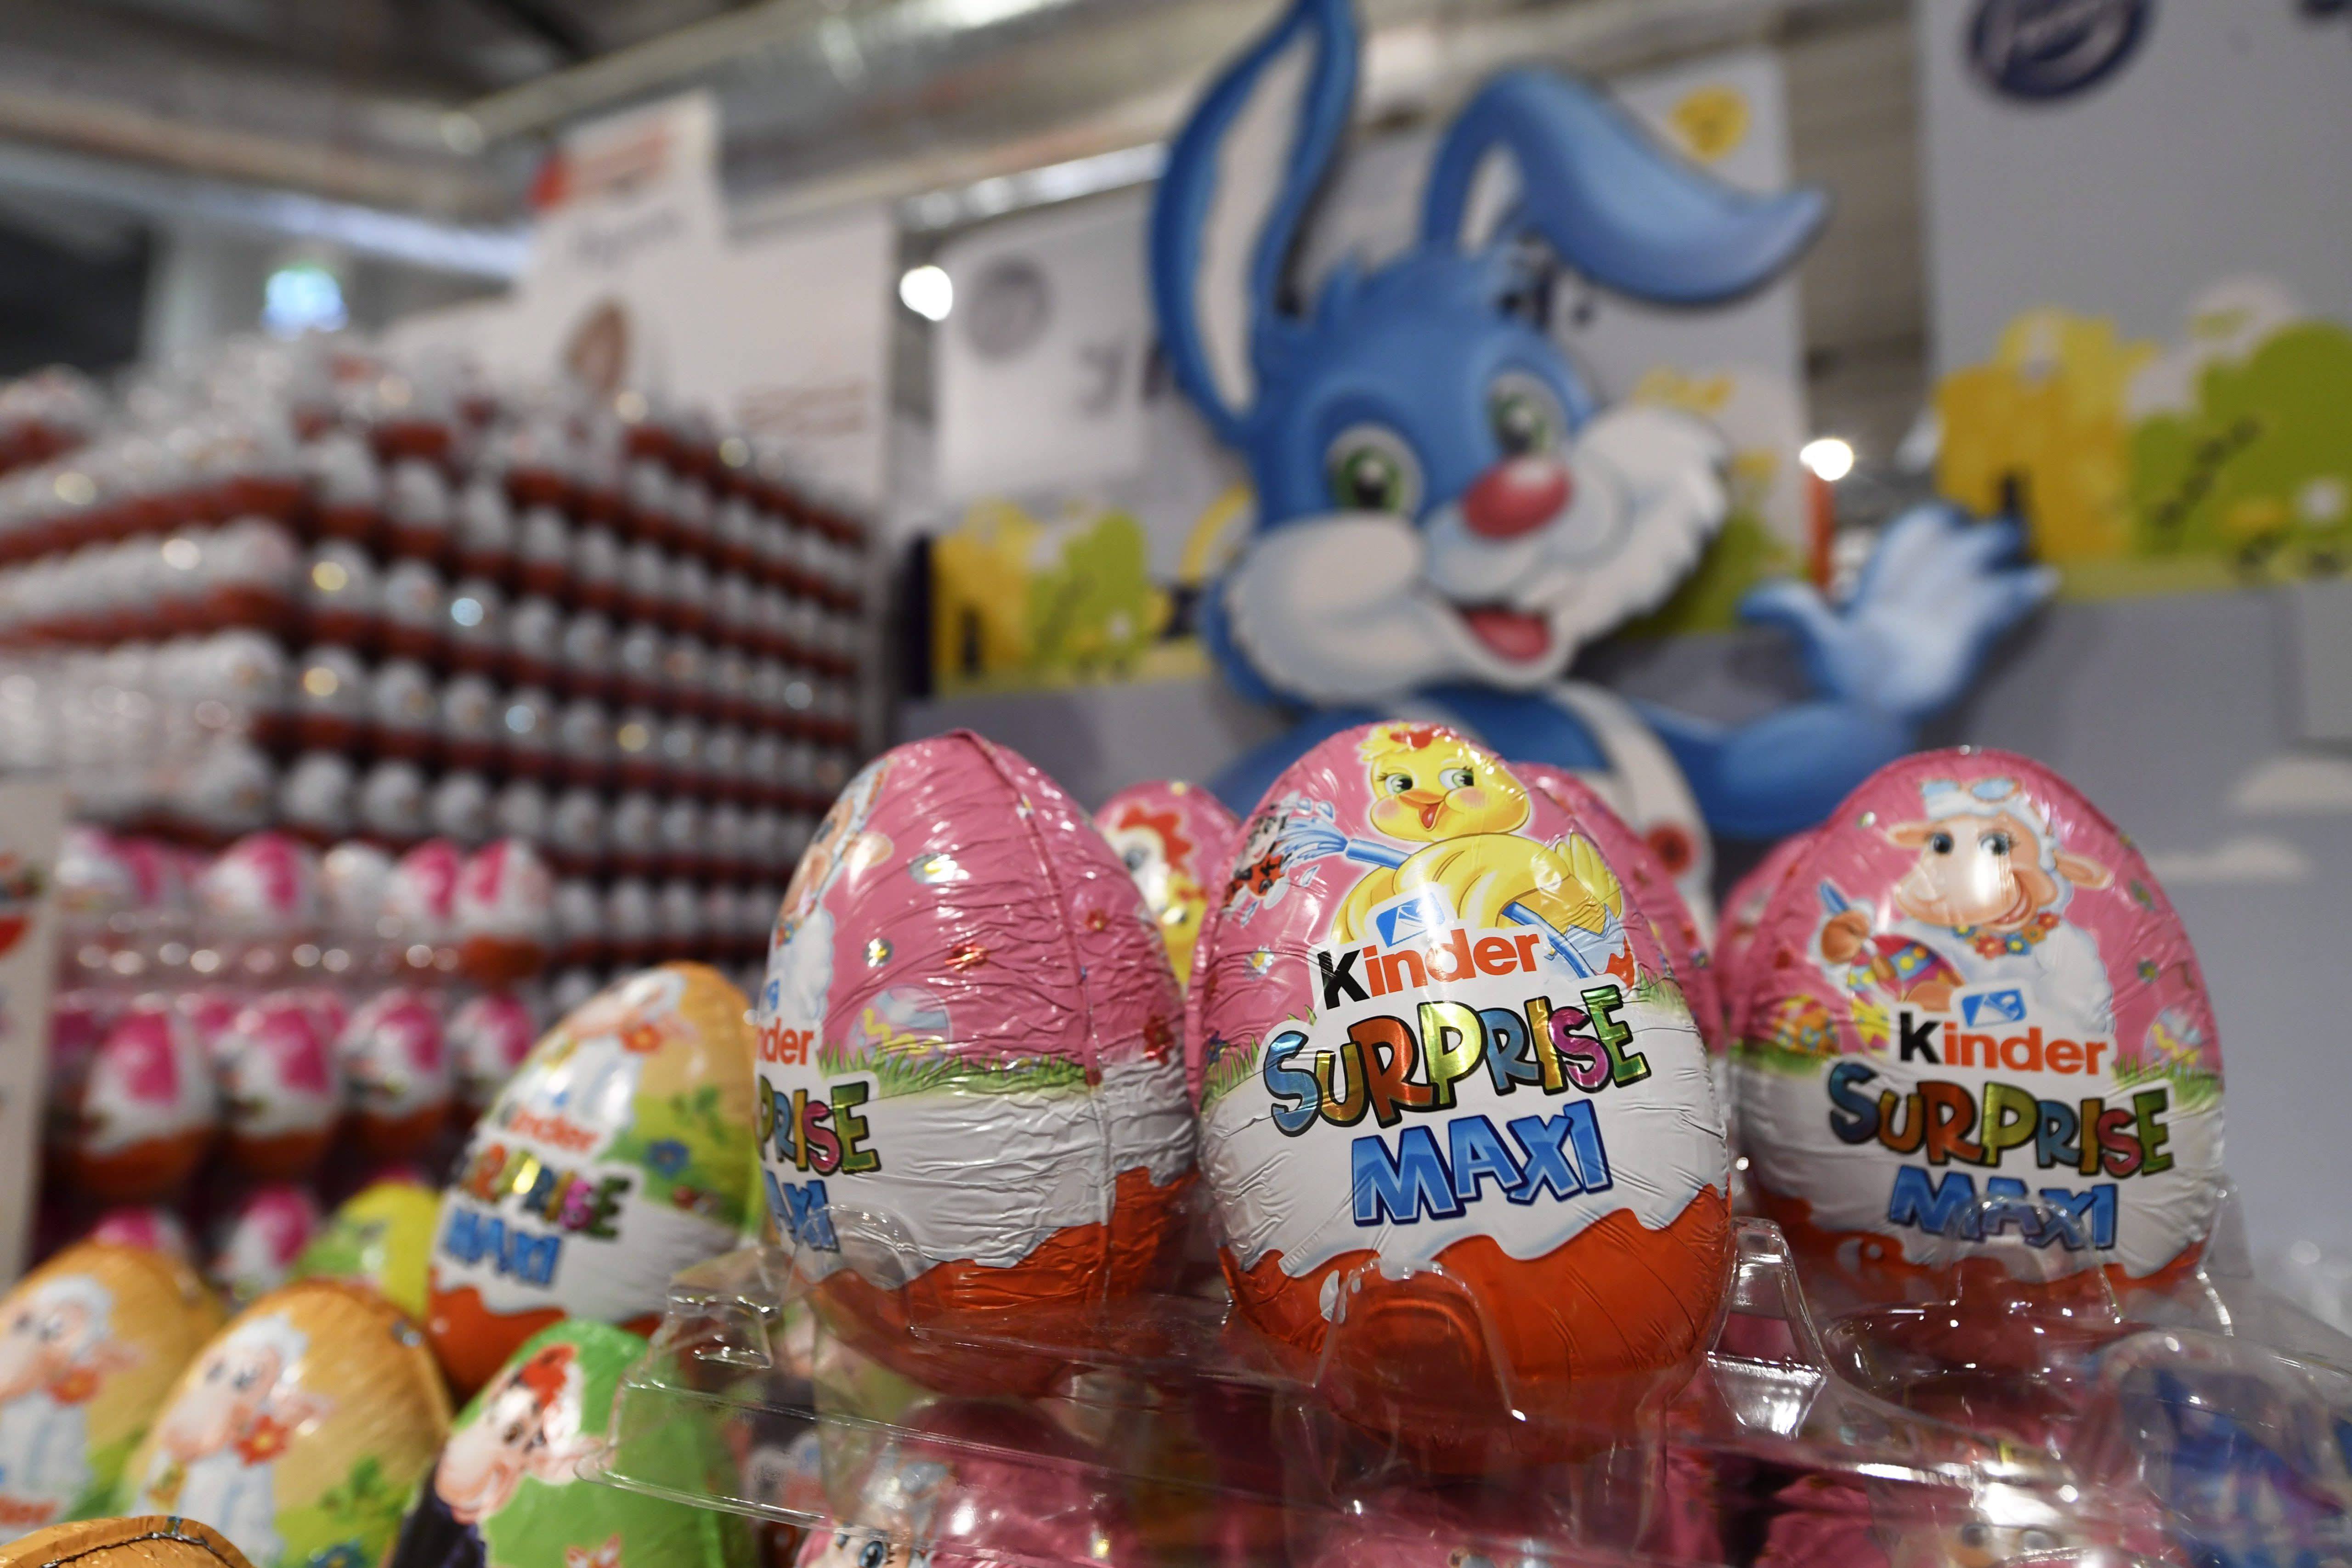 Food Authority: Do not eat reminded chocolate eggs